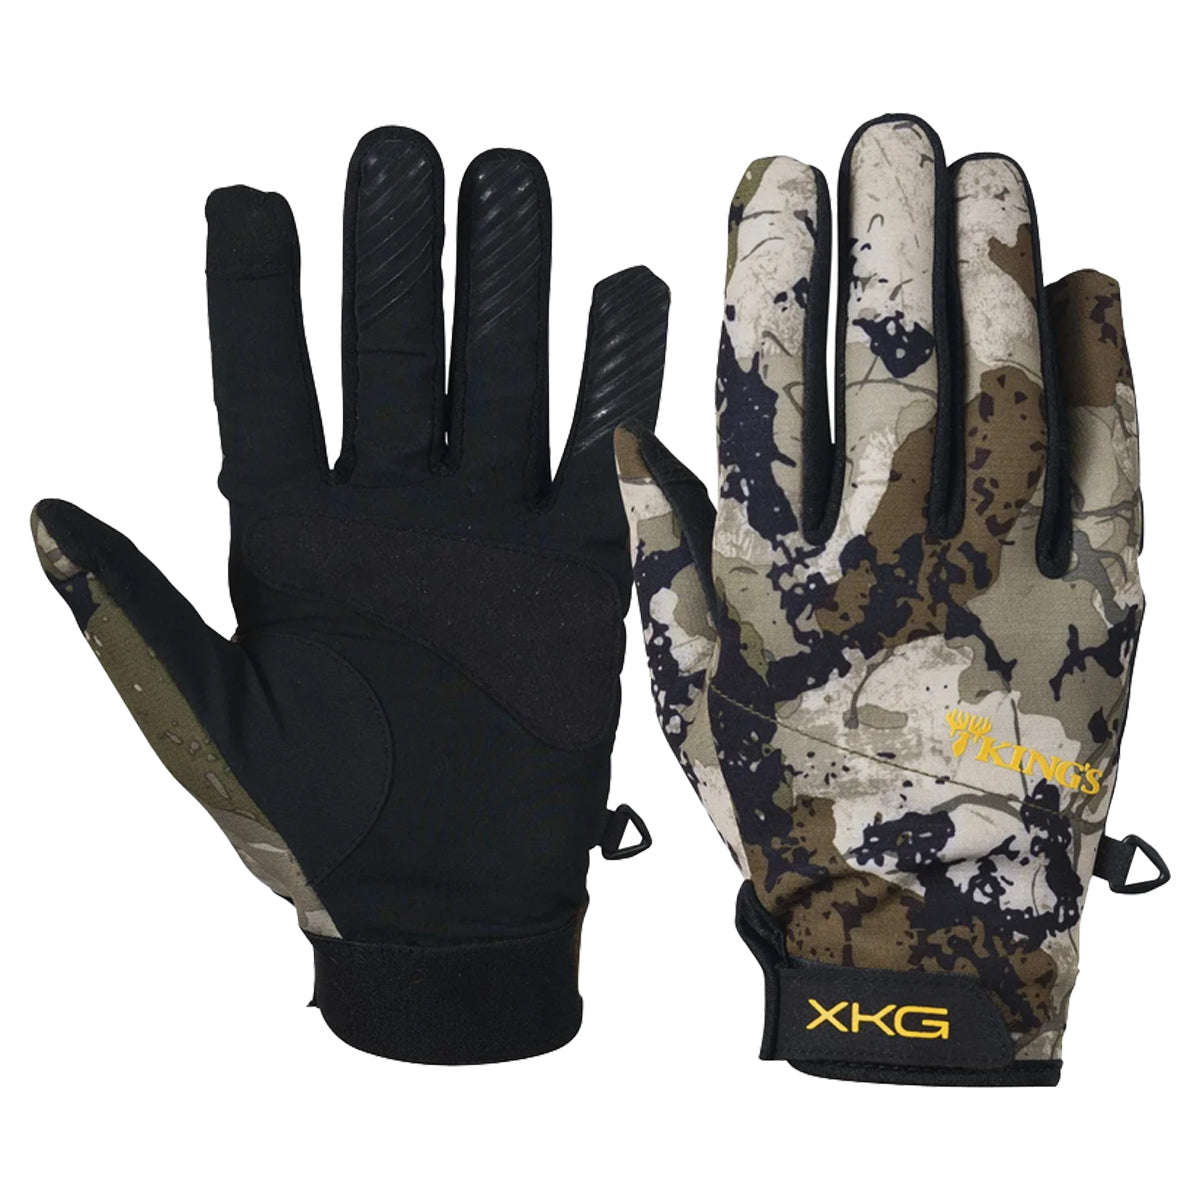 King's XKG Mid Weight Glove in XK7 by GOHUNT | King's - GOHUNT Shop